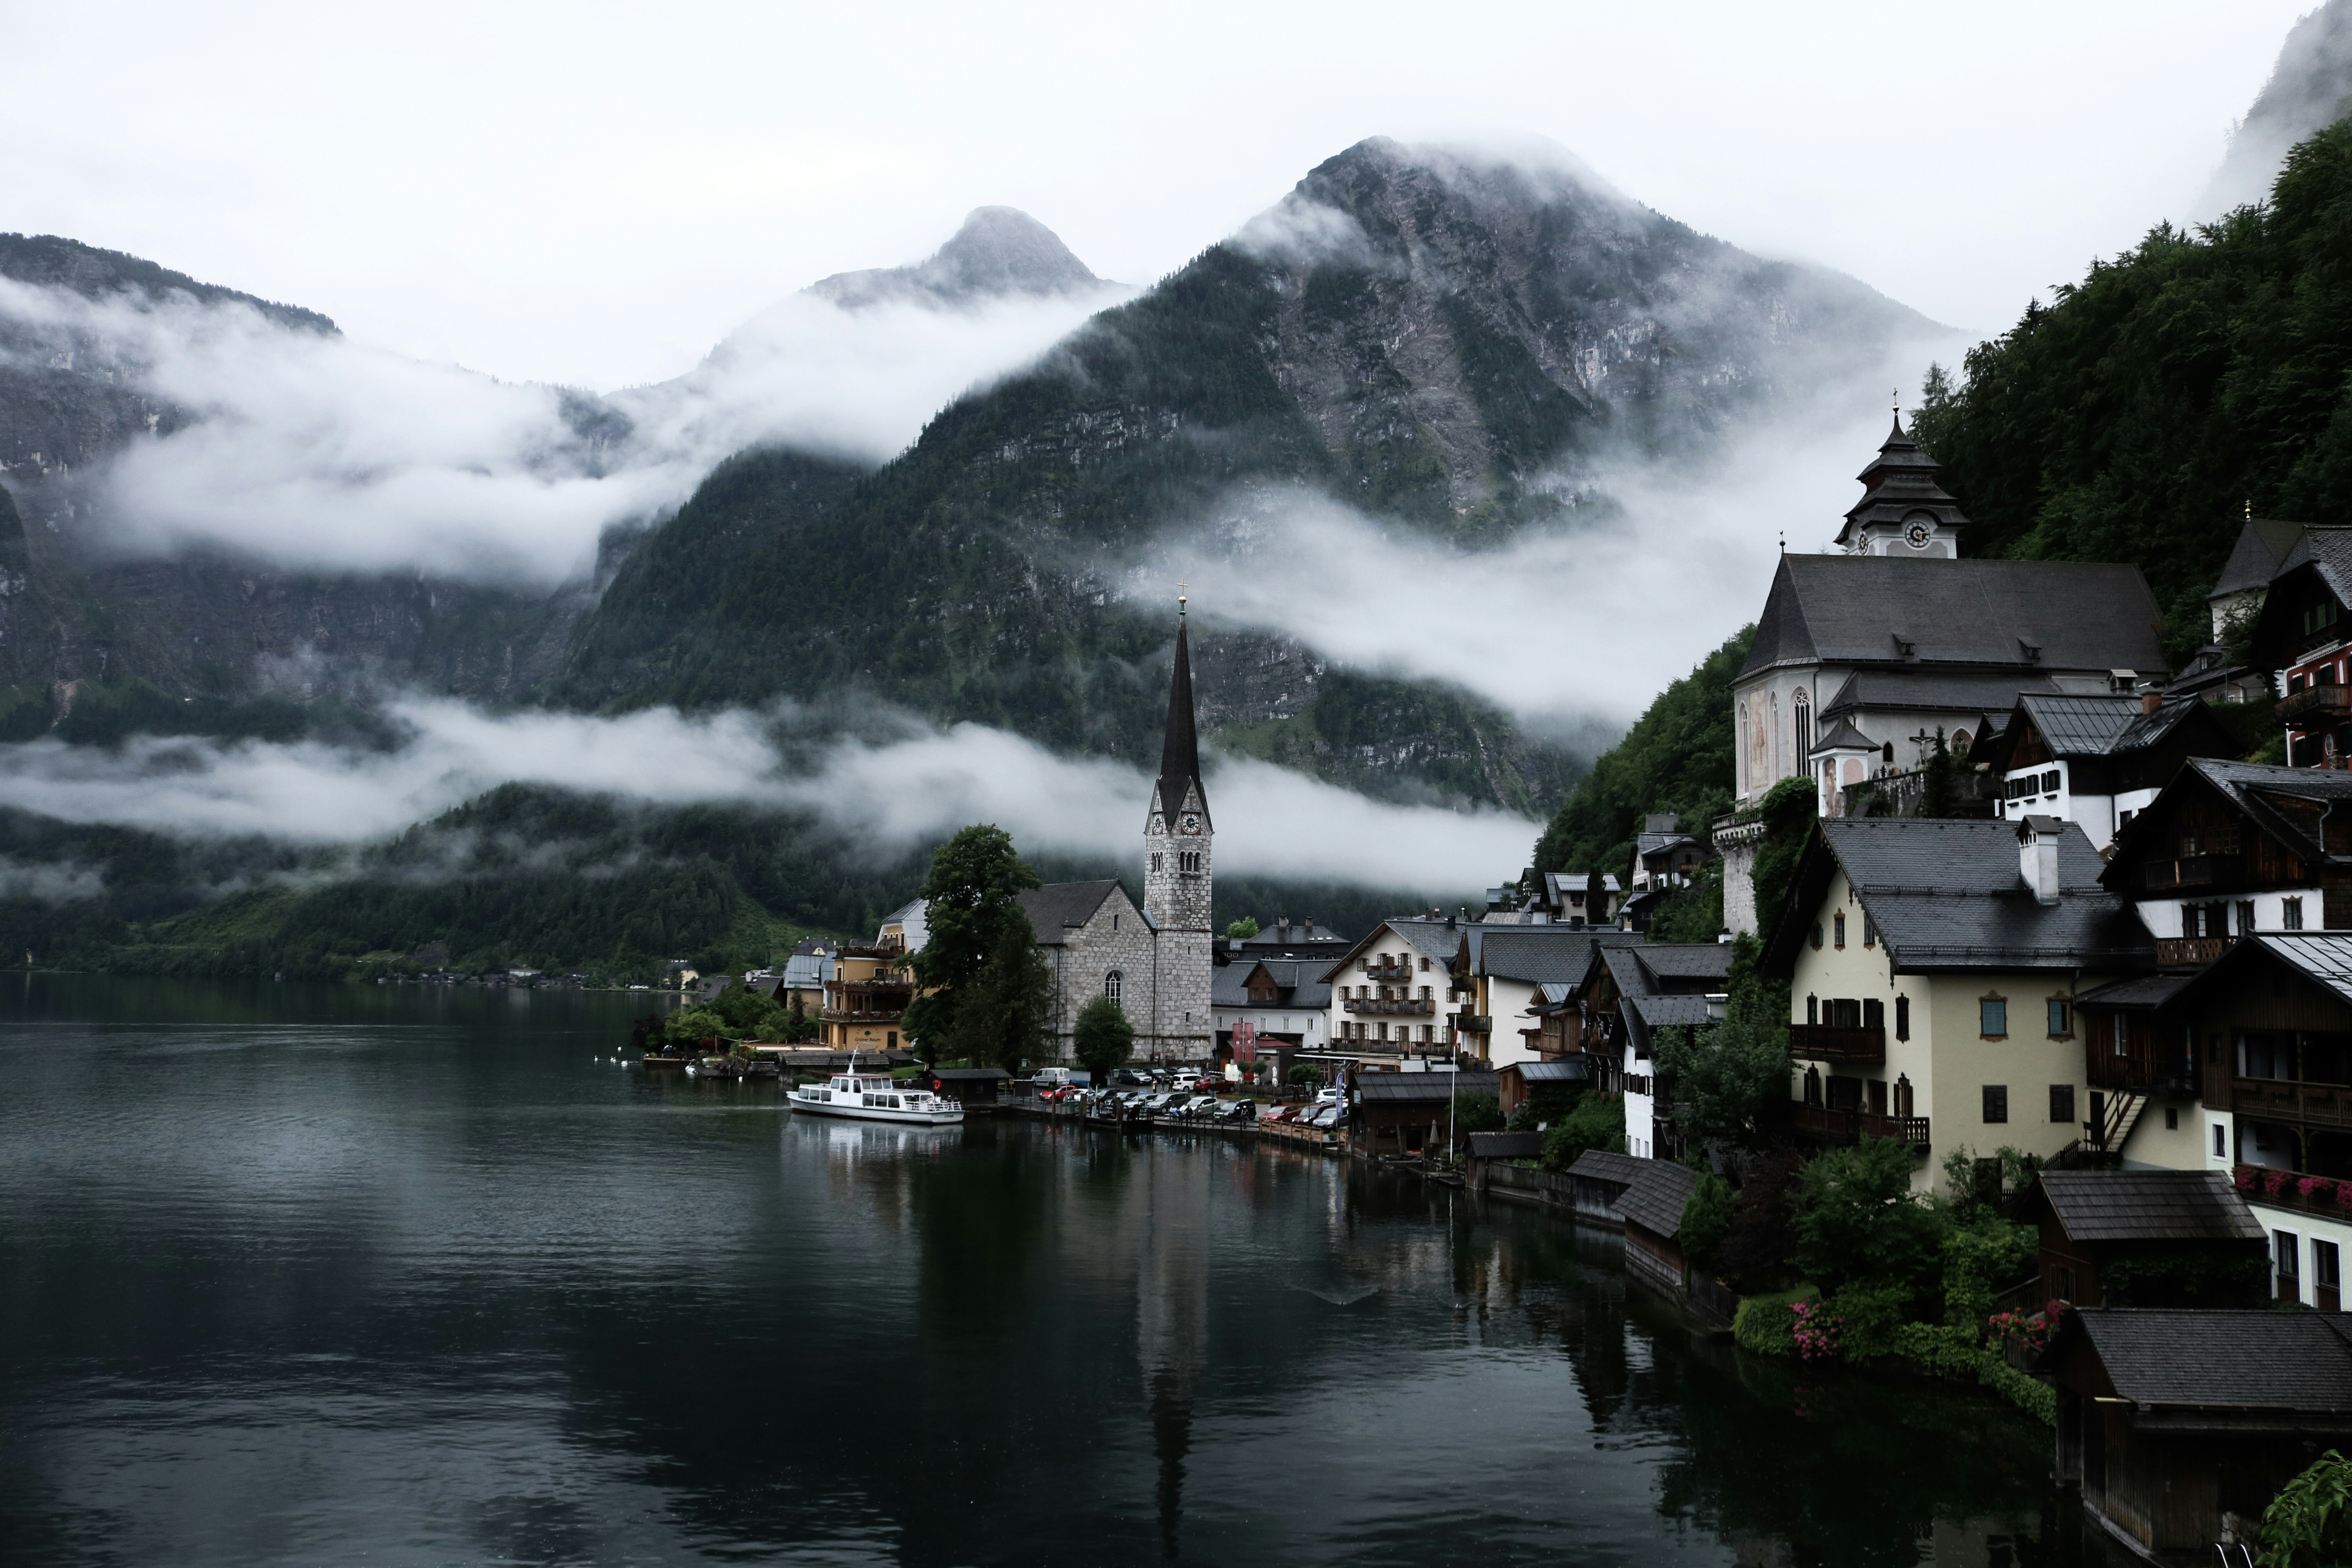 village near lake surrounded by fogs